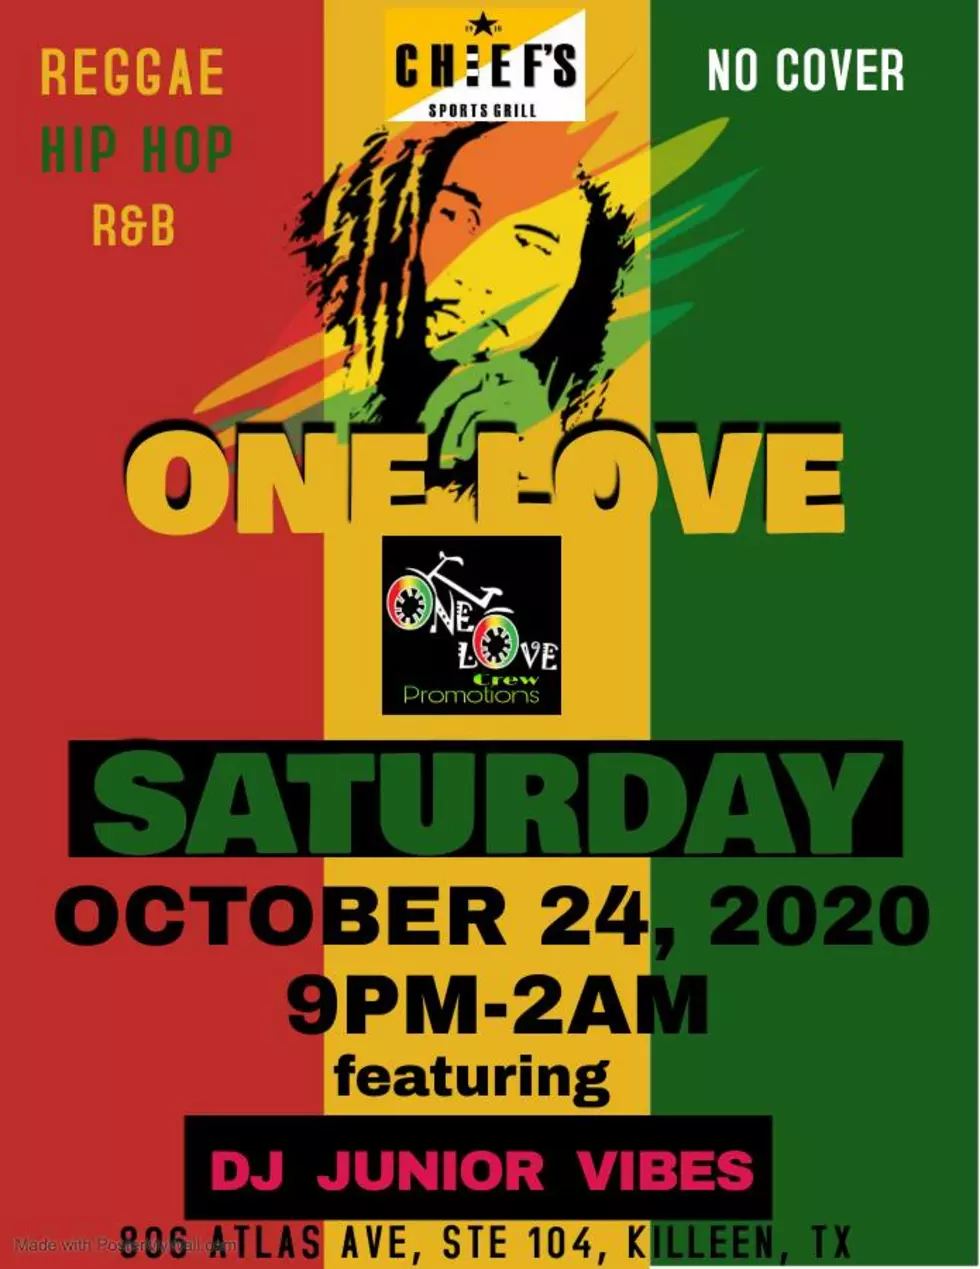 One Love Saturday Night Hosted By Melz At Chief’s In Killeen